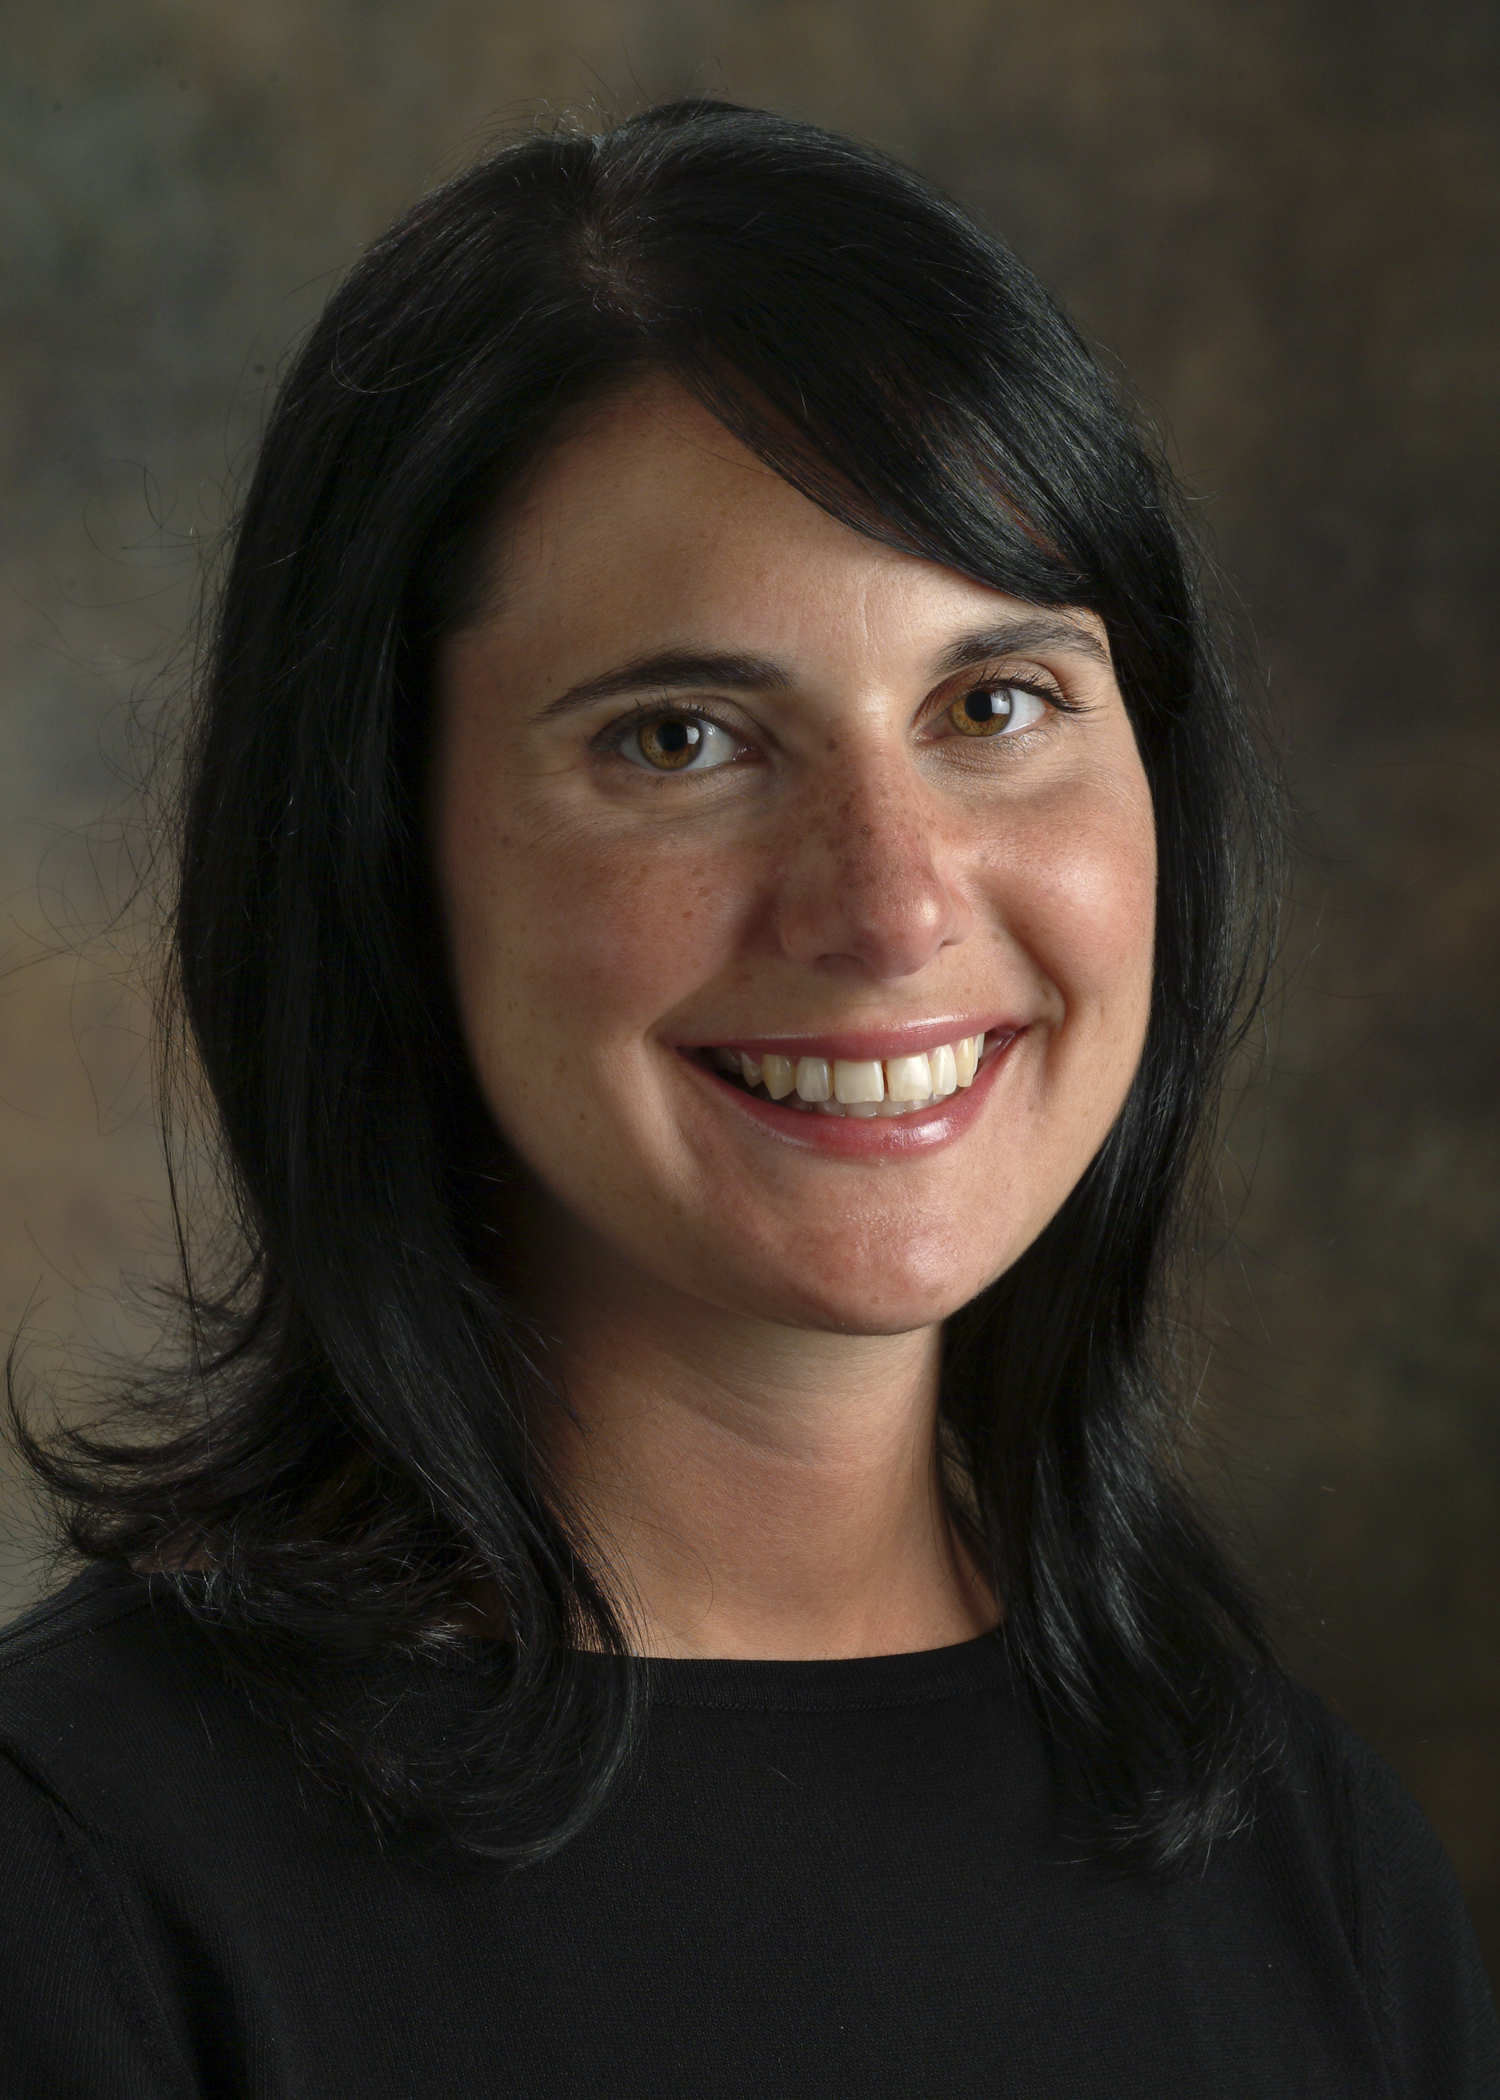 Professional photograph of Dr. Nobl Barazangi, a Caucasian woman with dark hair who is wearing a black blouse. 